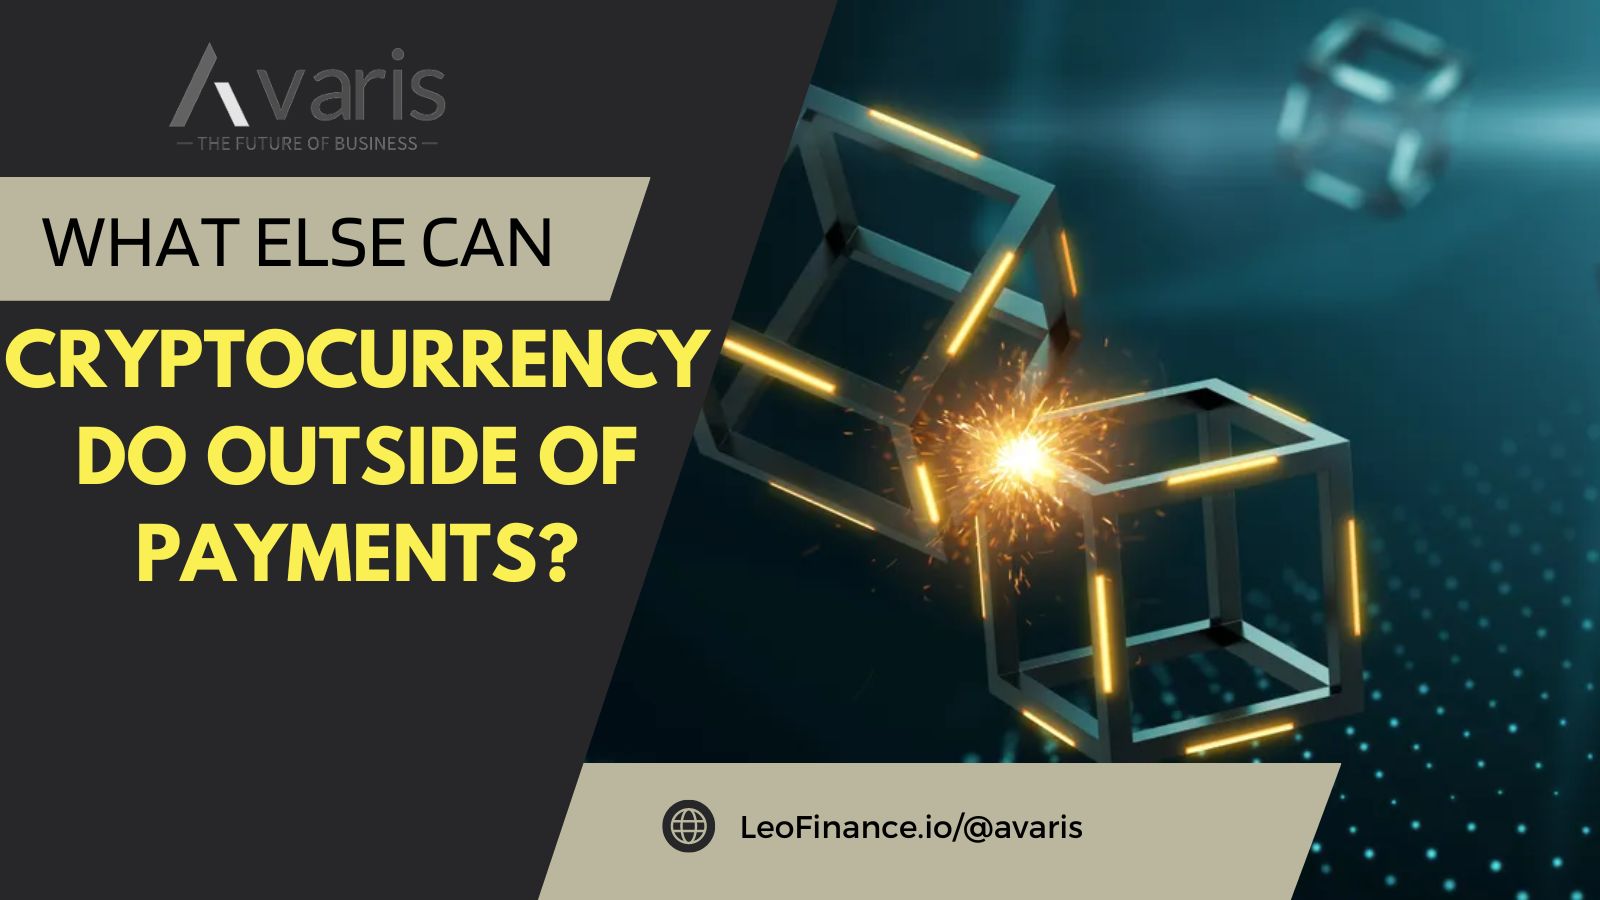 @avaris/what-else-can-cryptocurrency-do-outside-of-payments